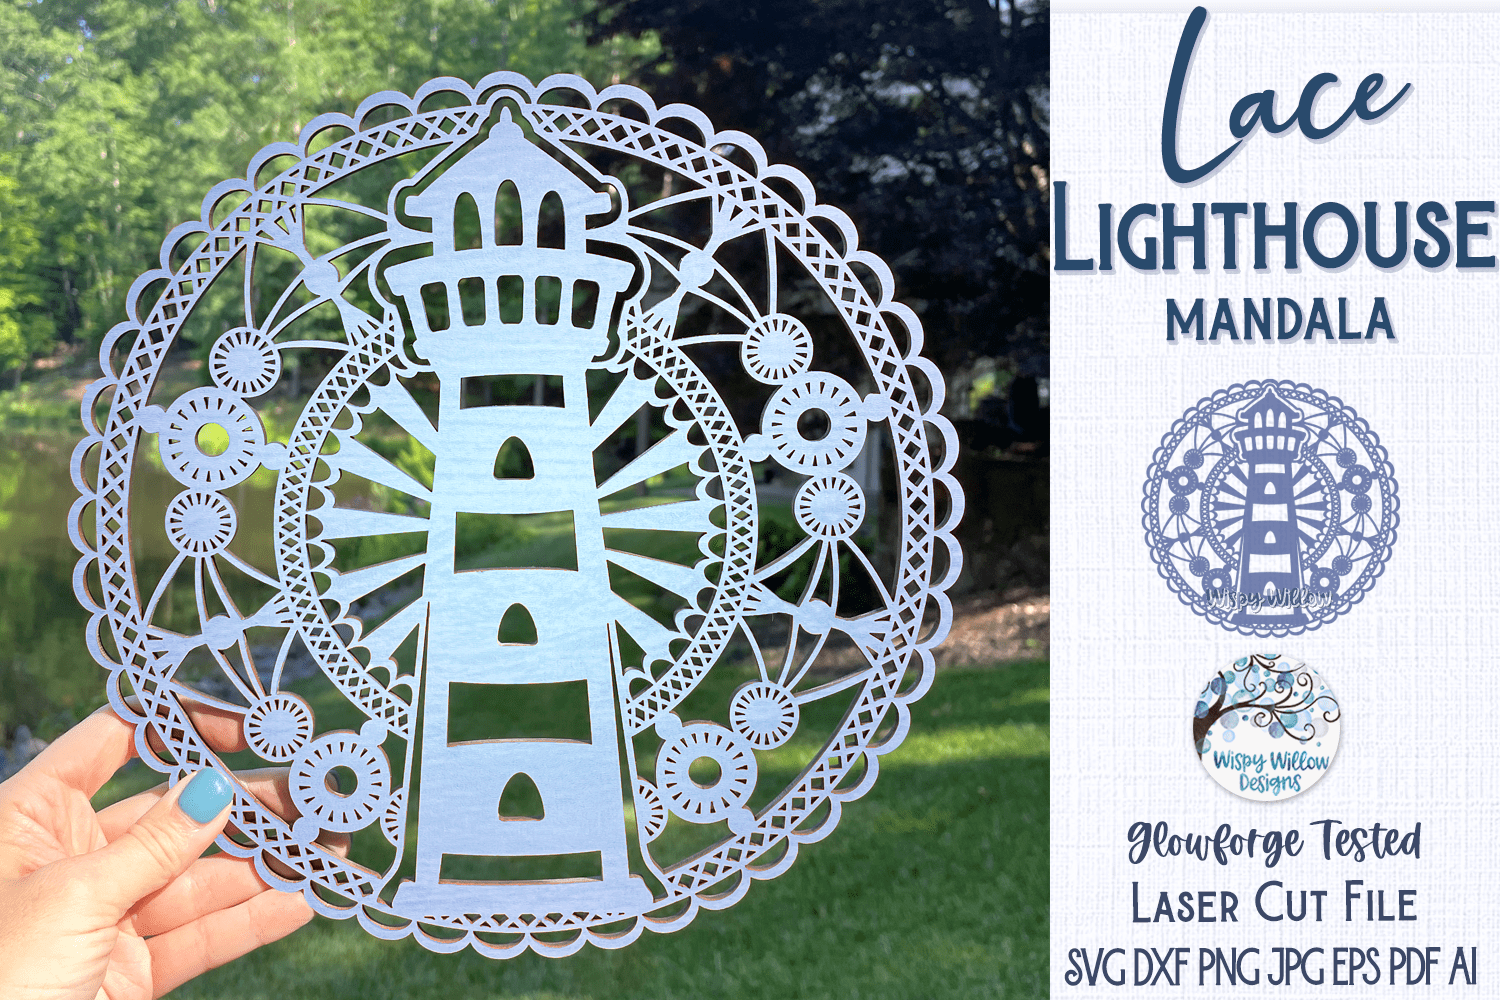 Lace Lighthouse Mandala for Laser or Glowforge Wispy Willow Designs Company